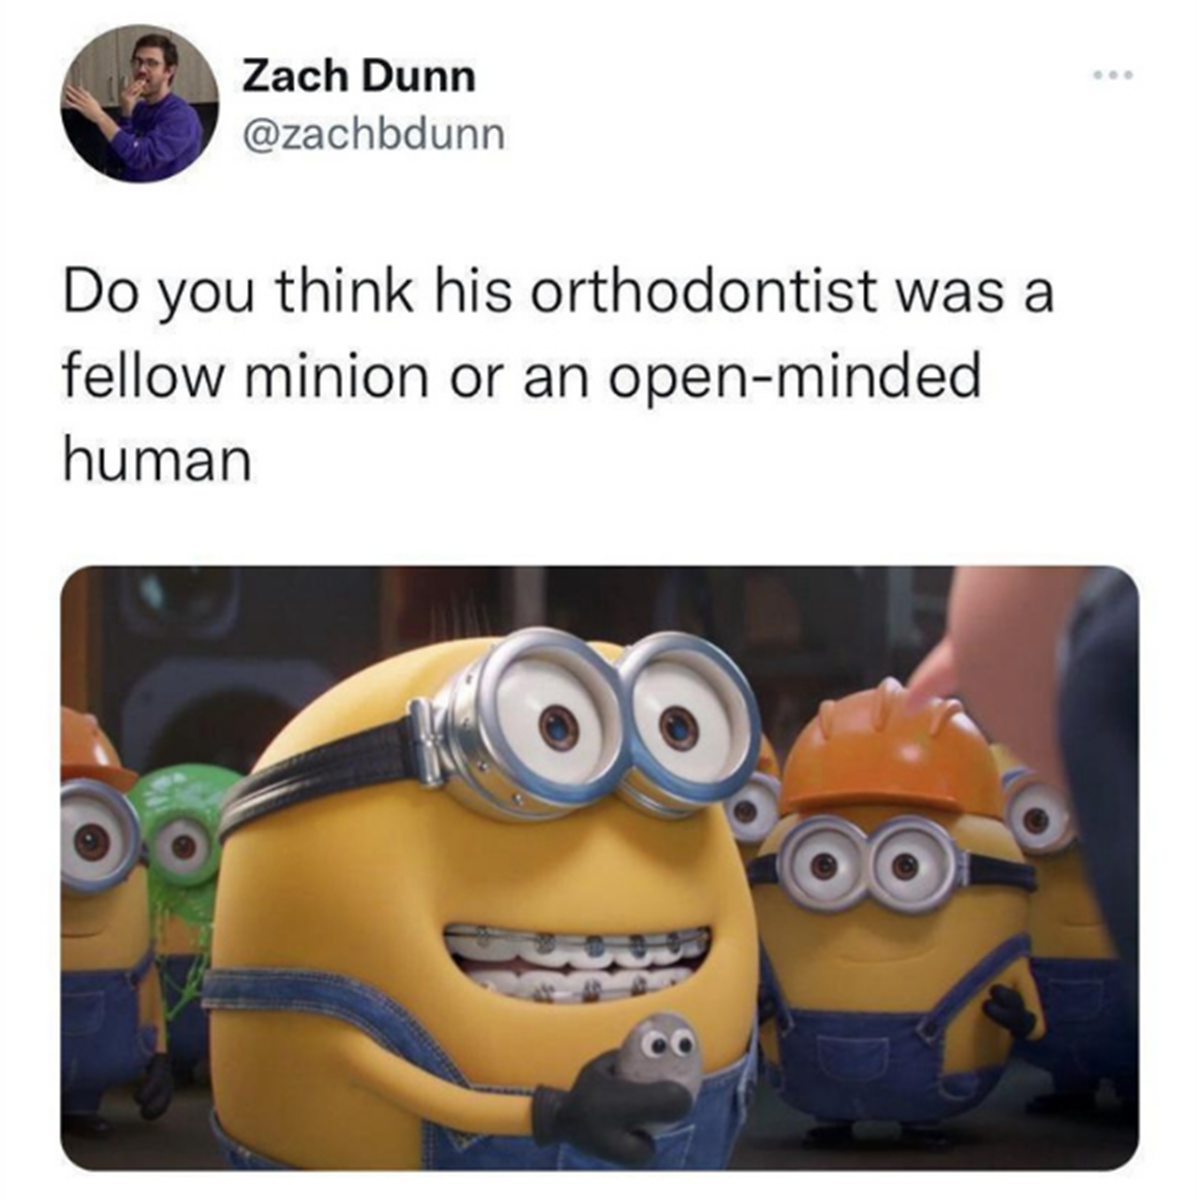 otto minion - Zach Dunn Do you think his orthodontist was a fellow minion or an openminded human